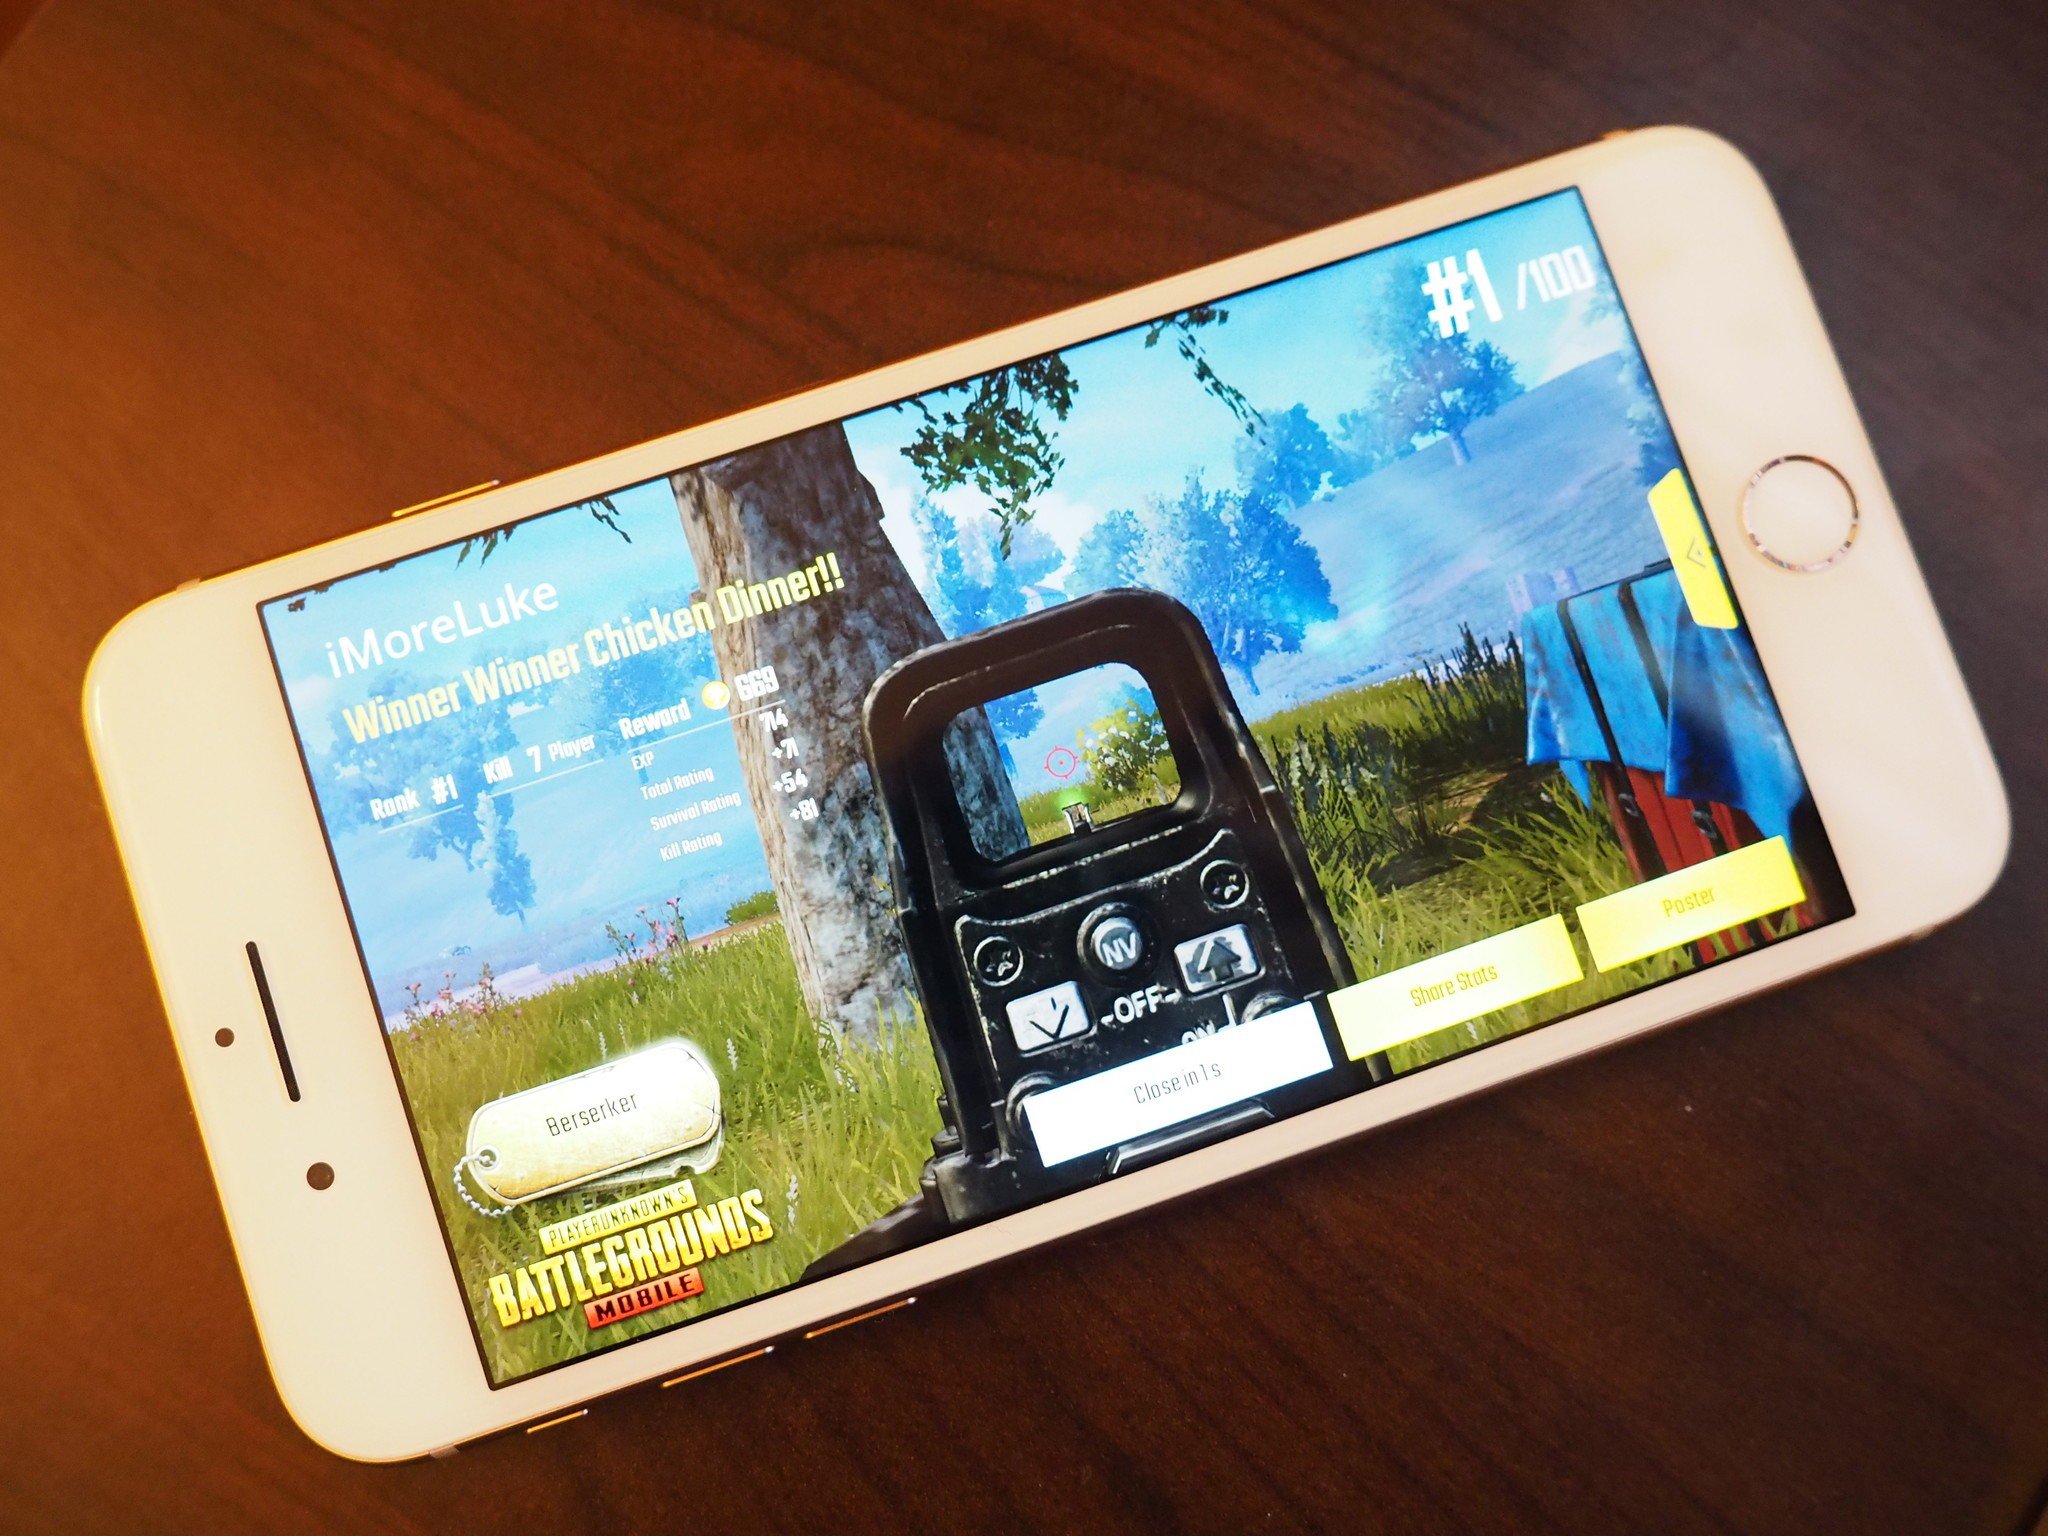 How To Play Pubg Mobile With Your Friends Imore - although pubg has built a reputation for its exhilarating 100 players free for all matches the game offers two different modes that allow you to team up